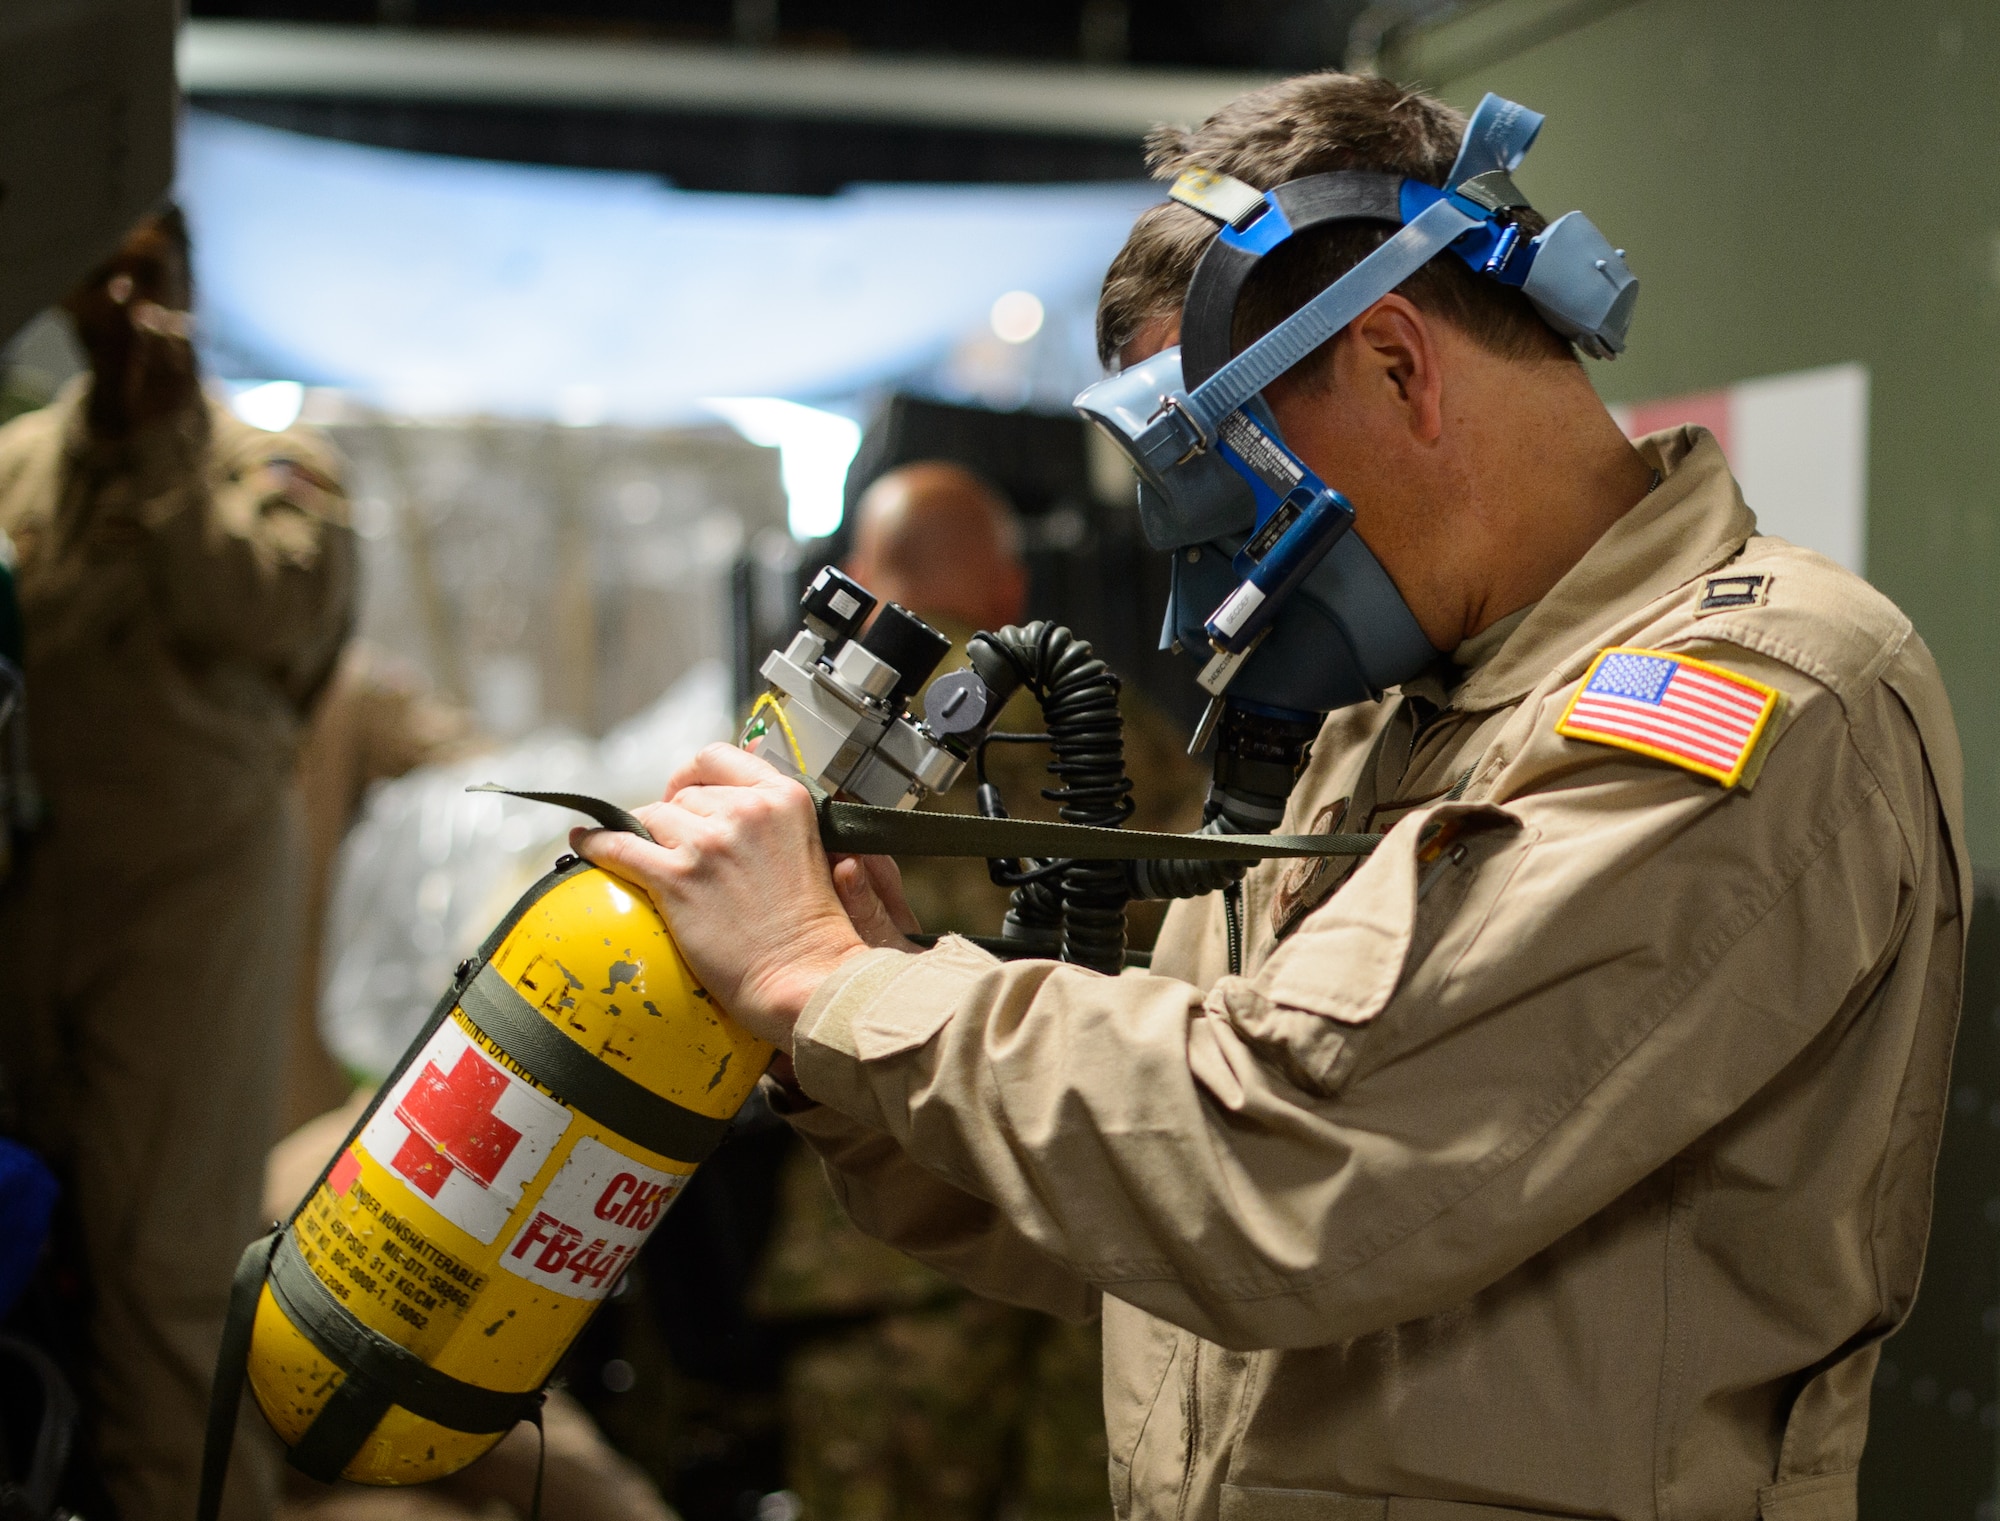 Capt. Benjamin Schultze, 10th Expeditionary Aeromedical Evacuation Flight nurse, adjusts his oxygen mask Nov. 10, 2015, at Ramstein Air Base, Germany. After configuring the inside of the C-17 Globemaster III into a flying ambulance, the Airmen test their equipment to ensure they can provide the best possible treatment while flying thousands of feet in the air. The 10th EAEF is a mixture of active-duty, reserve and guard Airmen deployed to Ramstein, constantly flying to war zones to retrieve patients needing higher levels of medical care. (U.S. Air Force photo/Staff Sgt. Armando A. Schwier-Morales)